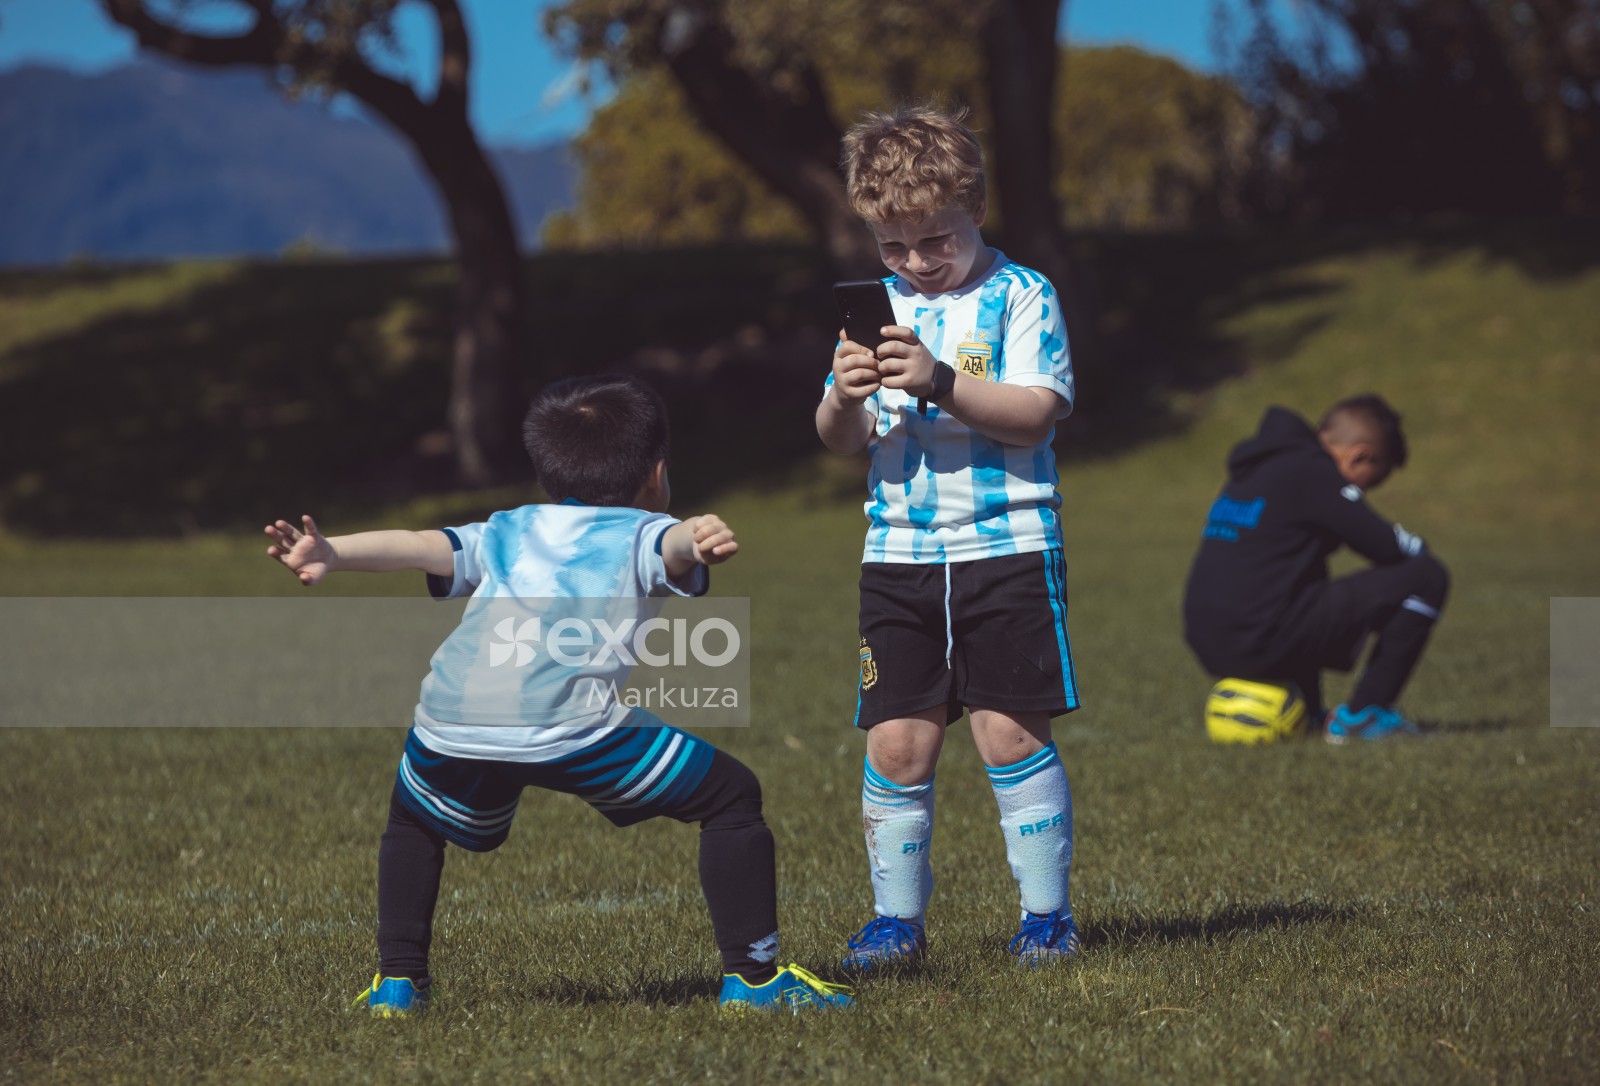 Kid taking picture of a teammate posing